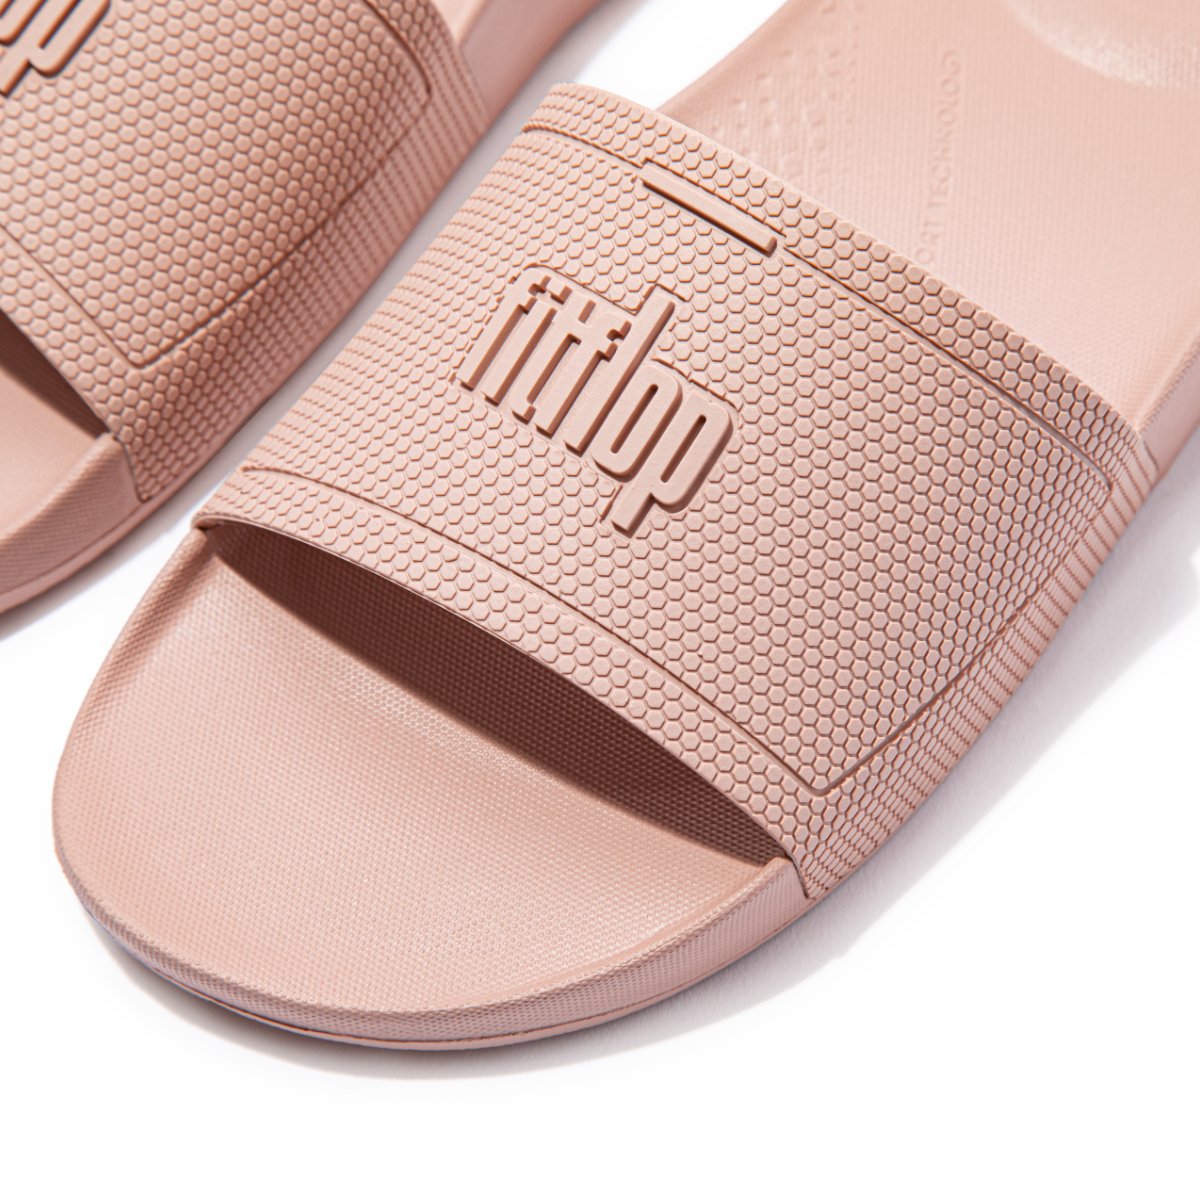 FitFlop iQUSHION Pool Sliders Beige close up